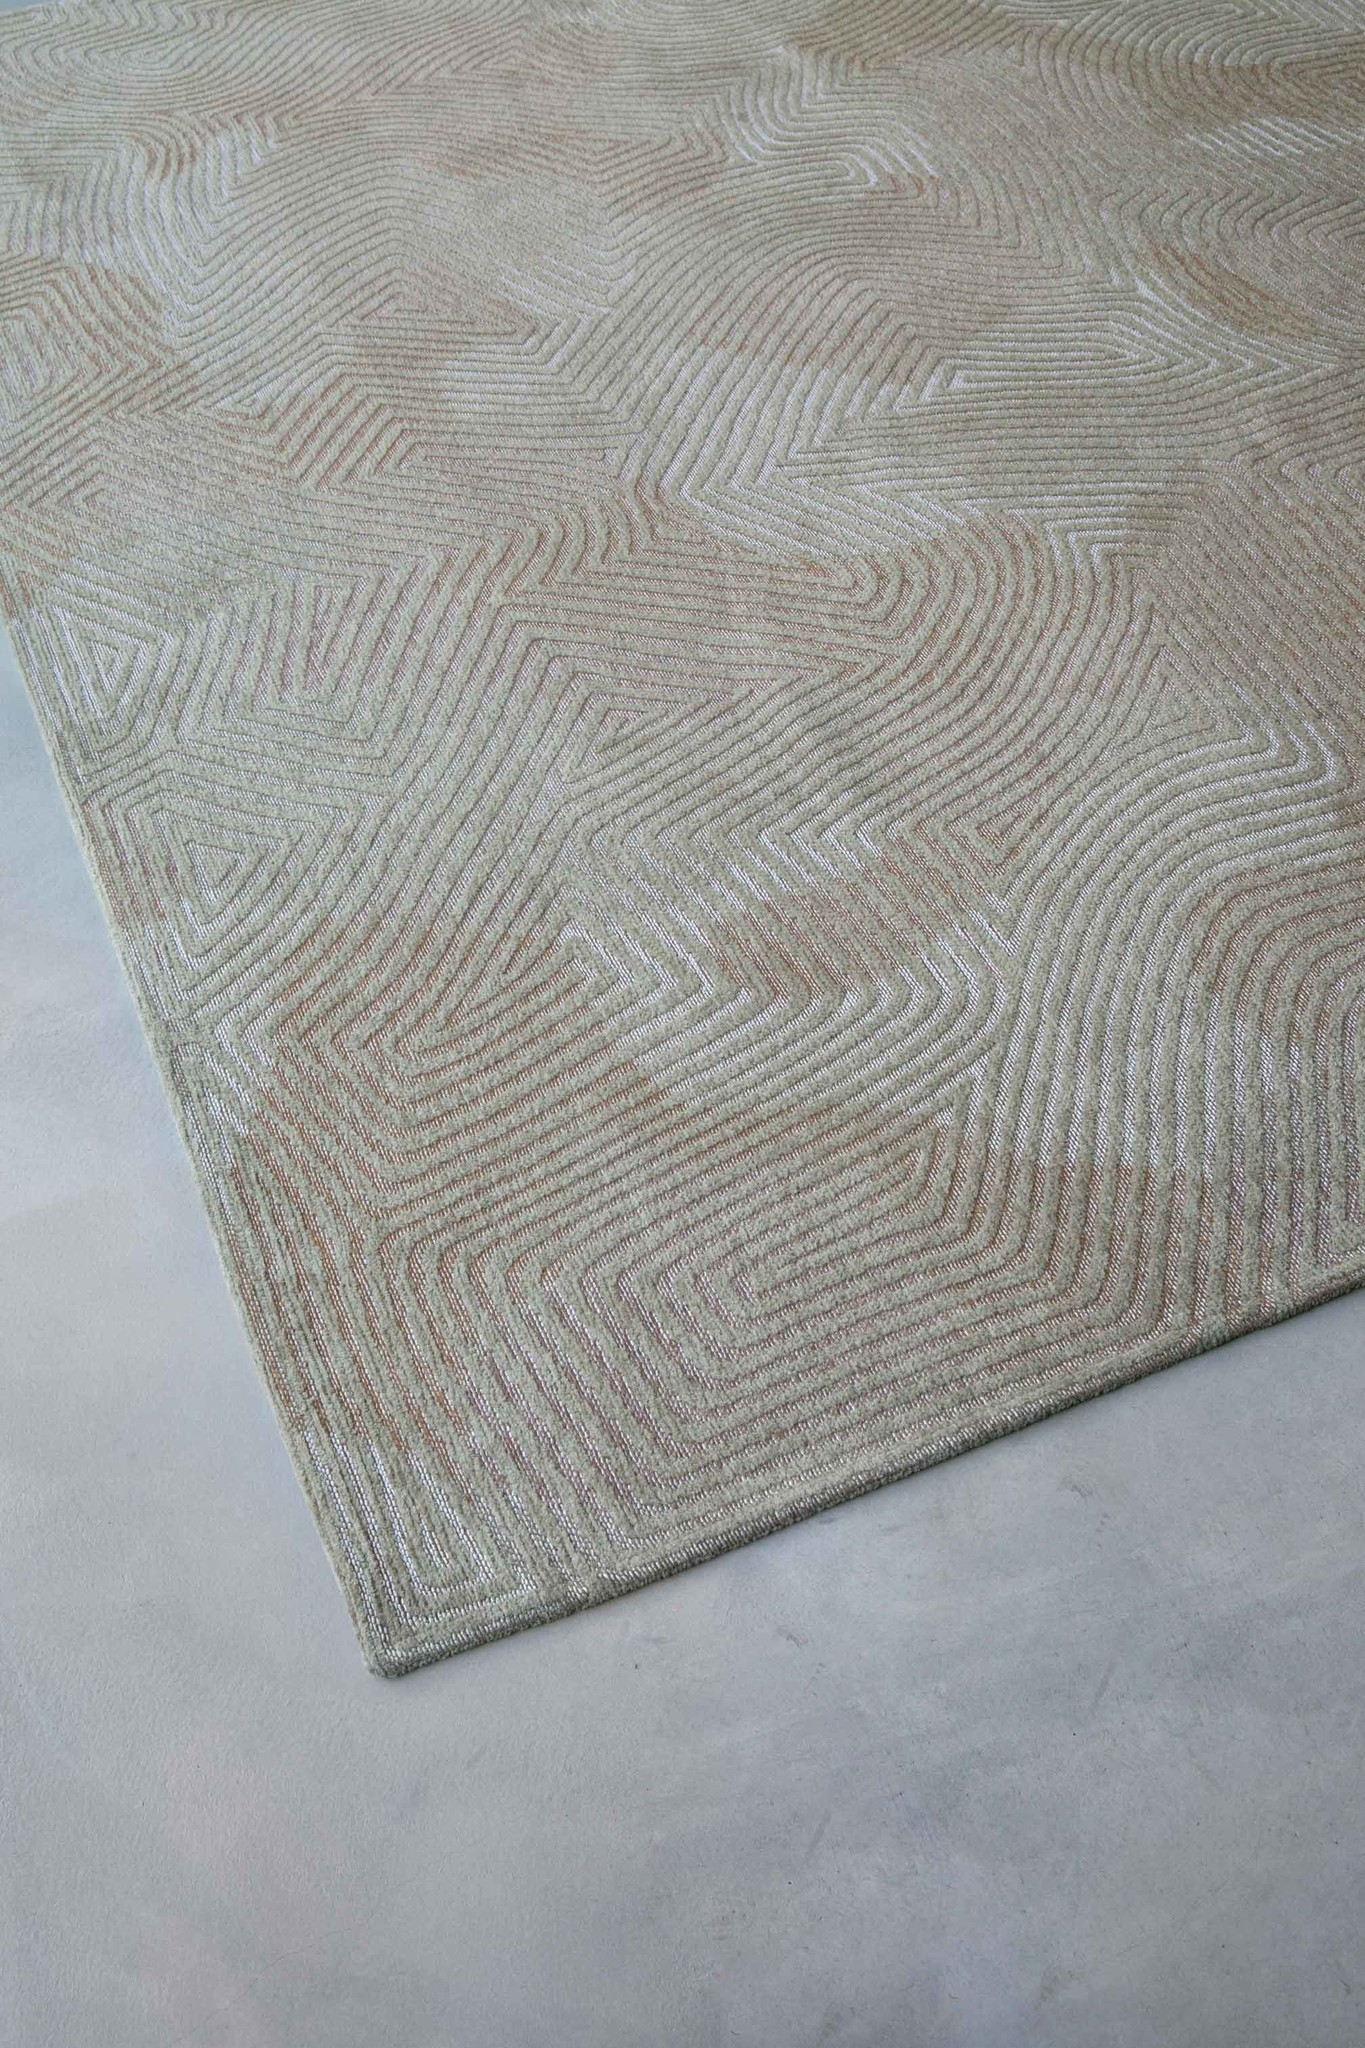 Coral - Shell Beige 9229 ☞ Size: 170 x 240 cm